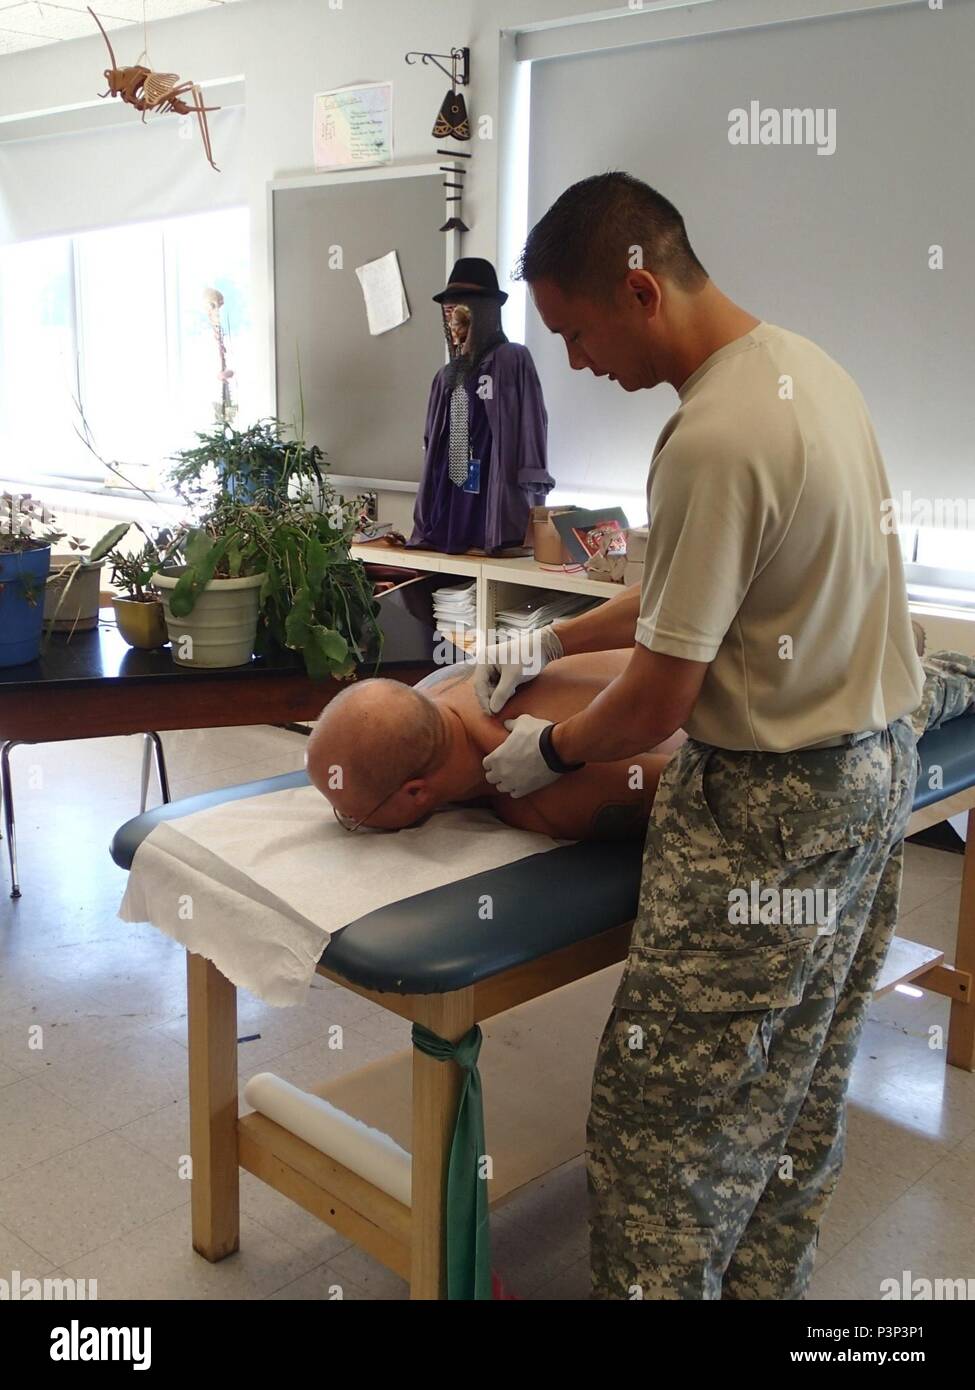 Maj. Joseph Flores, a physical therapist with Company A, 48th Combat Support Hospital out of Fort Story, Va., performs a dry needling therapy technique on a patient during Greater Chenango Cares, July 23, 2016.  Greater Chenango Cares is one of the Innovative Readiness Training events which provides real-world training in a joint civil-military environment while delivering world-class medical care to the people of Chenango County, N.Y., from July 15-24. Stock Photo